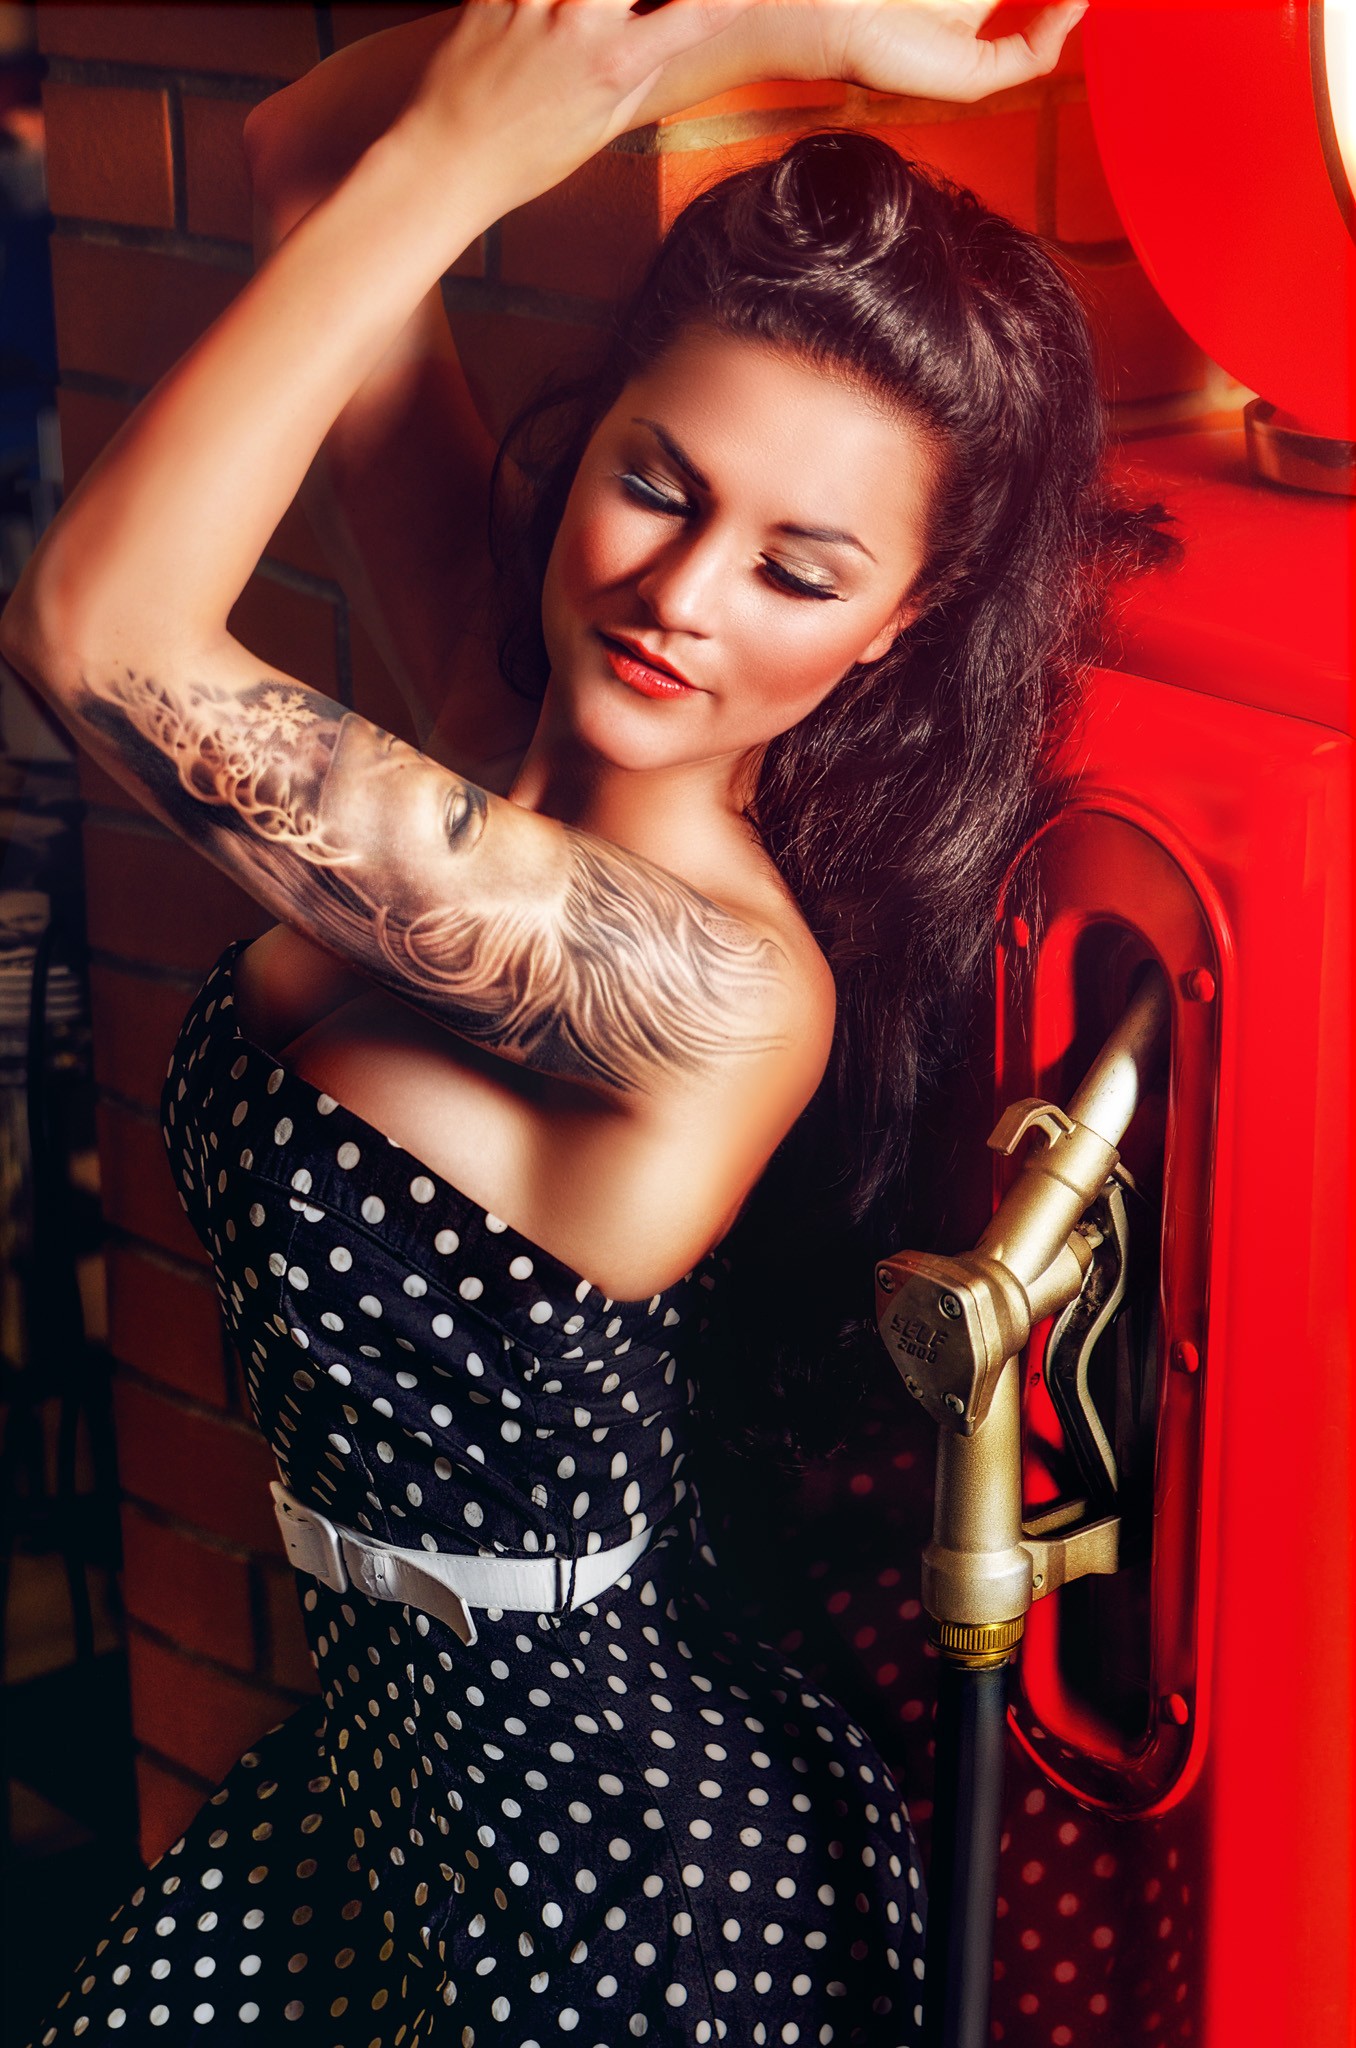 People 1356x2048 Beatrice Mary Bexter brunette women model tattoo women indoors dress polka dots inked girls makeup boobs arms up indoors